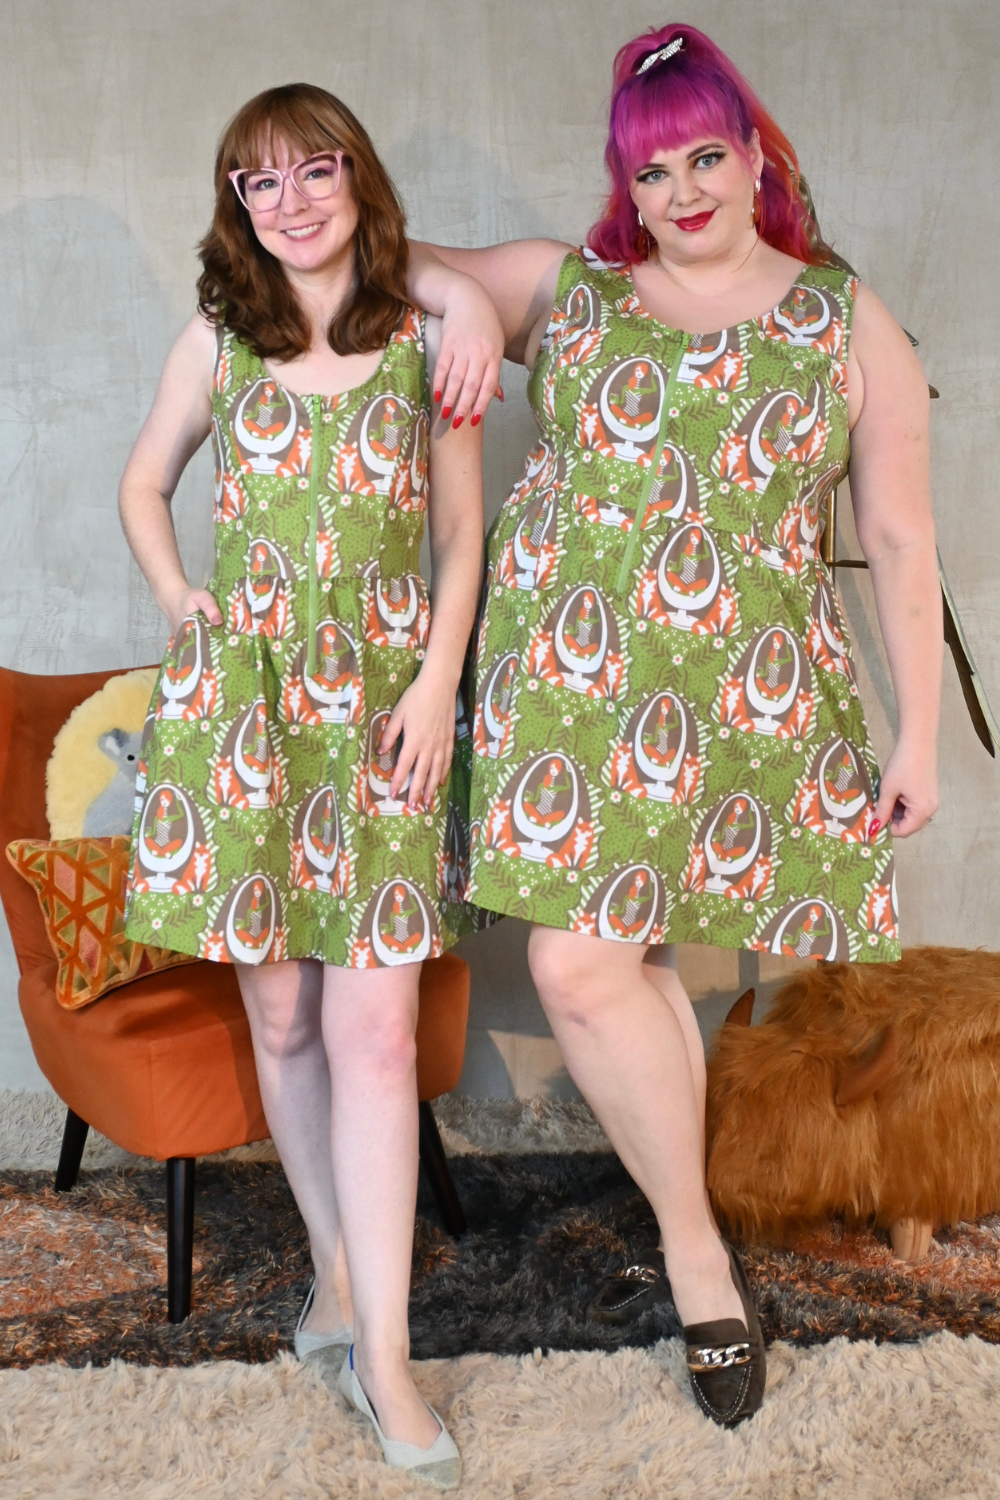 Two smiling models wearing olive green, orange, and brown fox and girl print dresses in an earth-toned room